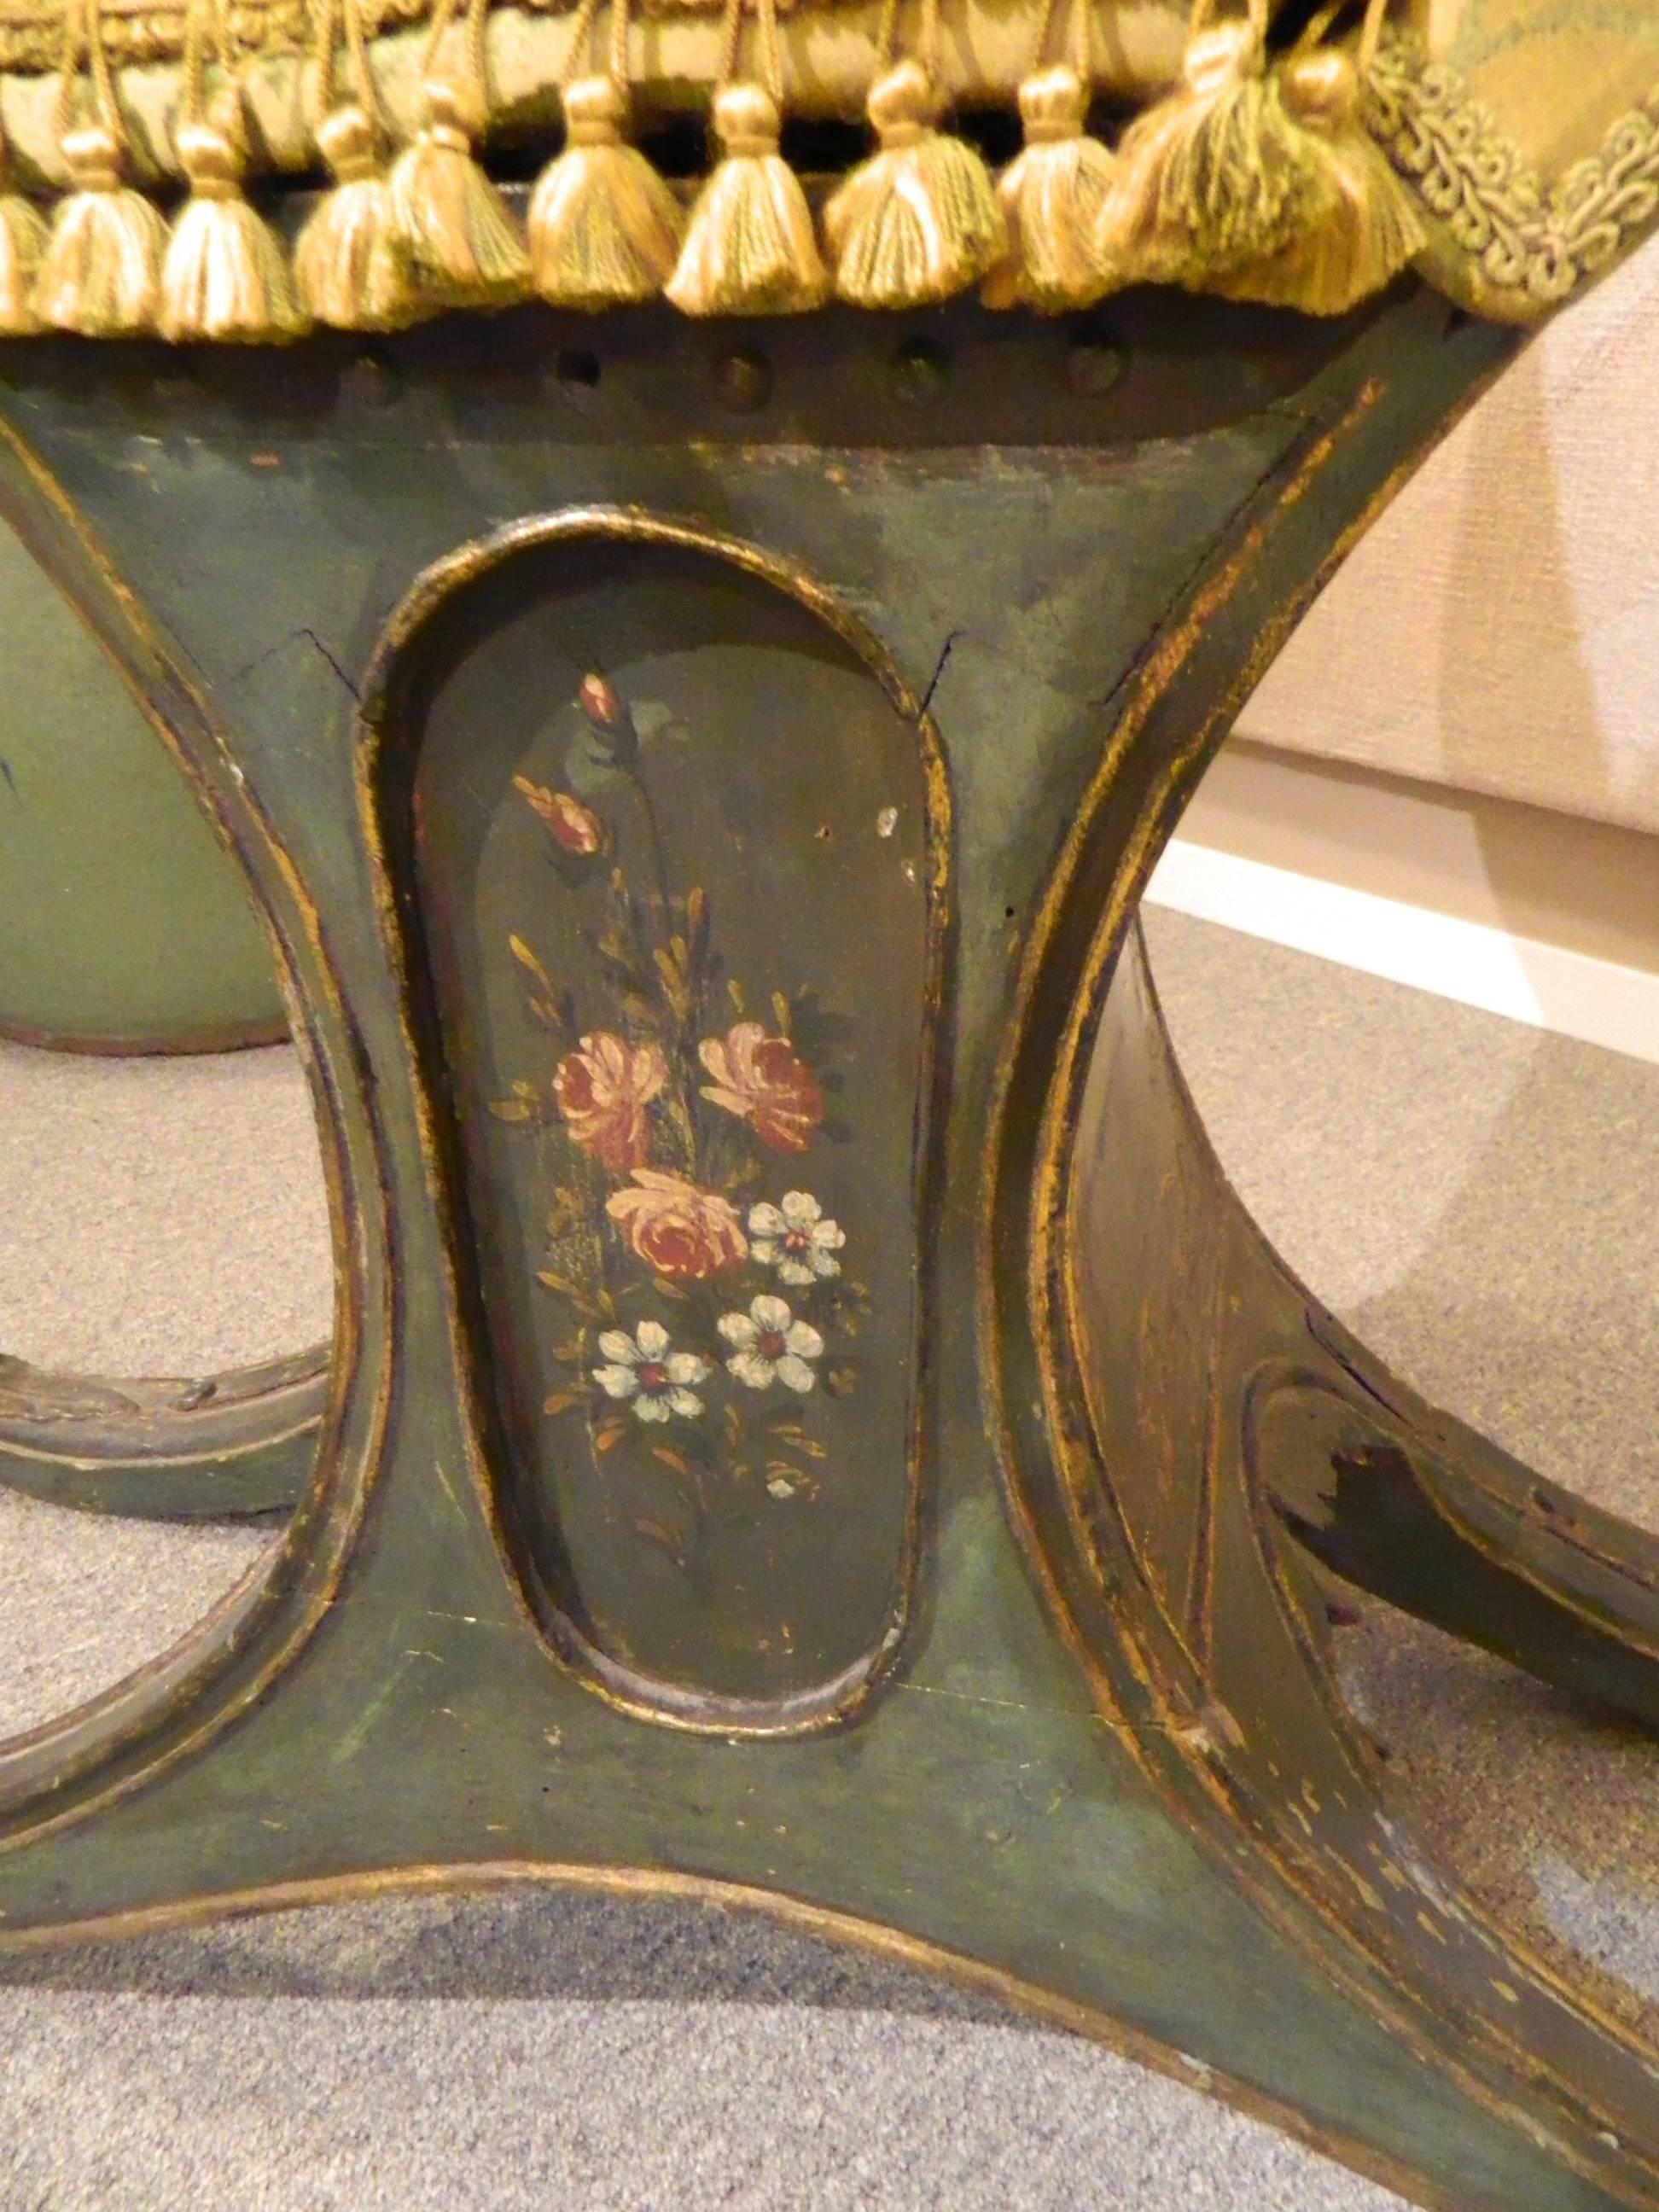 Rare Venetian antique gondola child's chair painted with flowers and a lion on the back. It is upholstered in a silk damask. The small size makes this a good accent piece with a 10